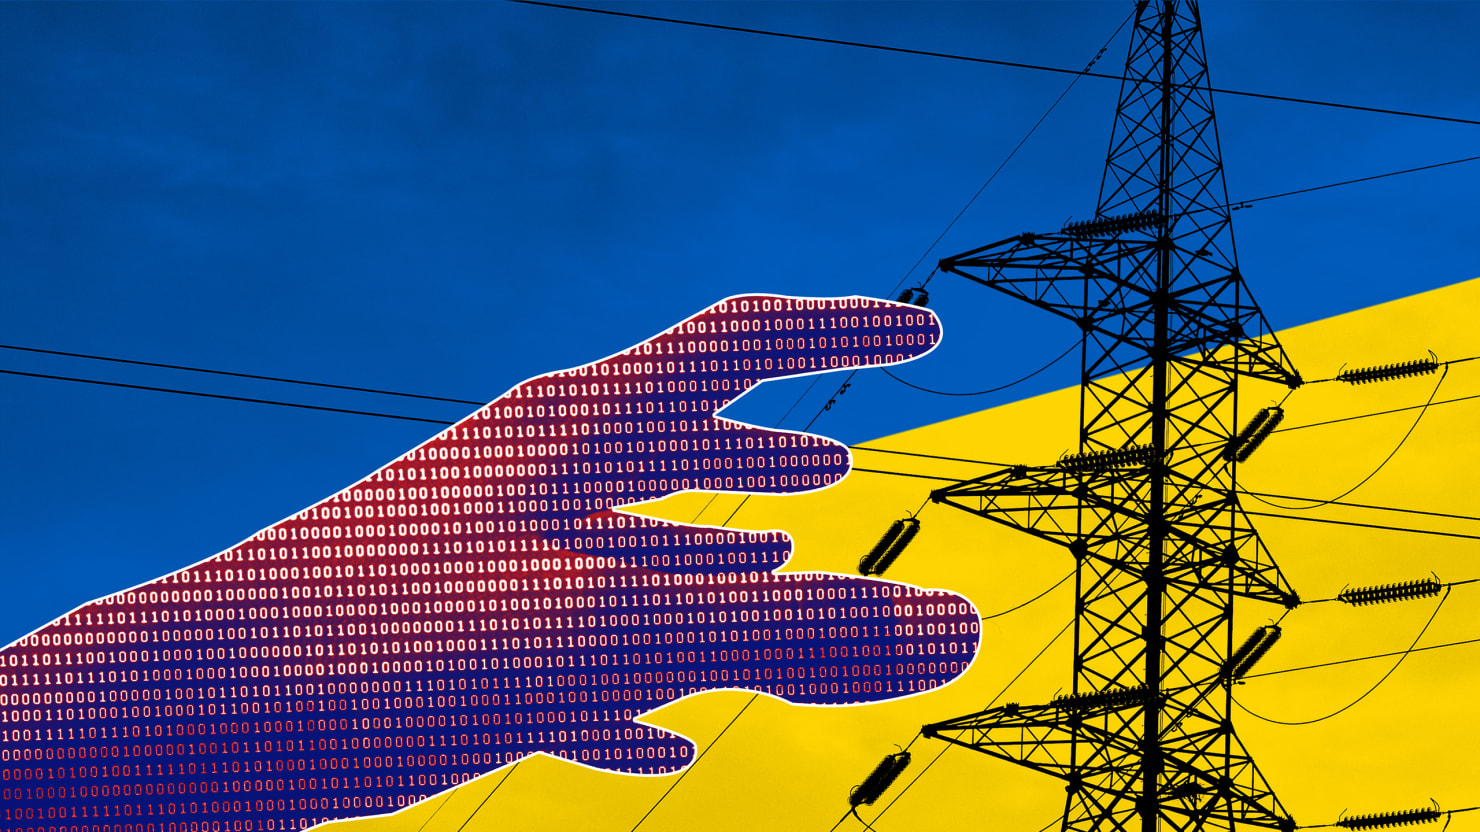 What Happens When Russian Hackers Cyberattack the U.S. Electric